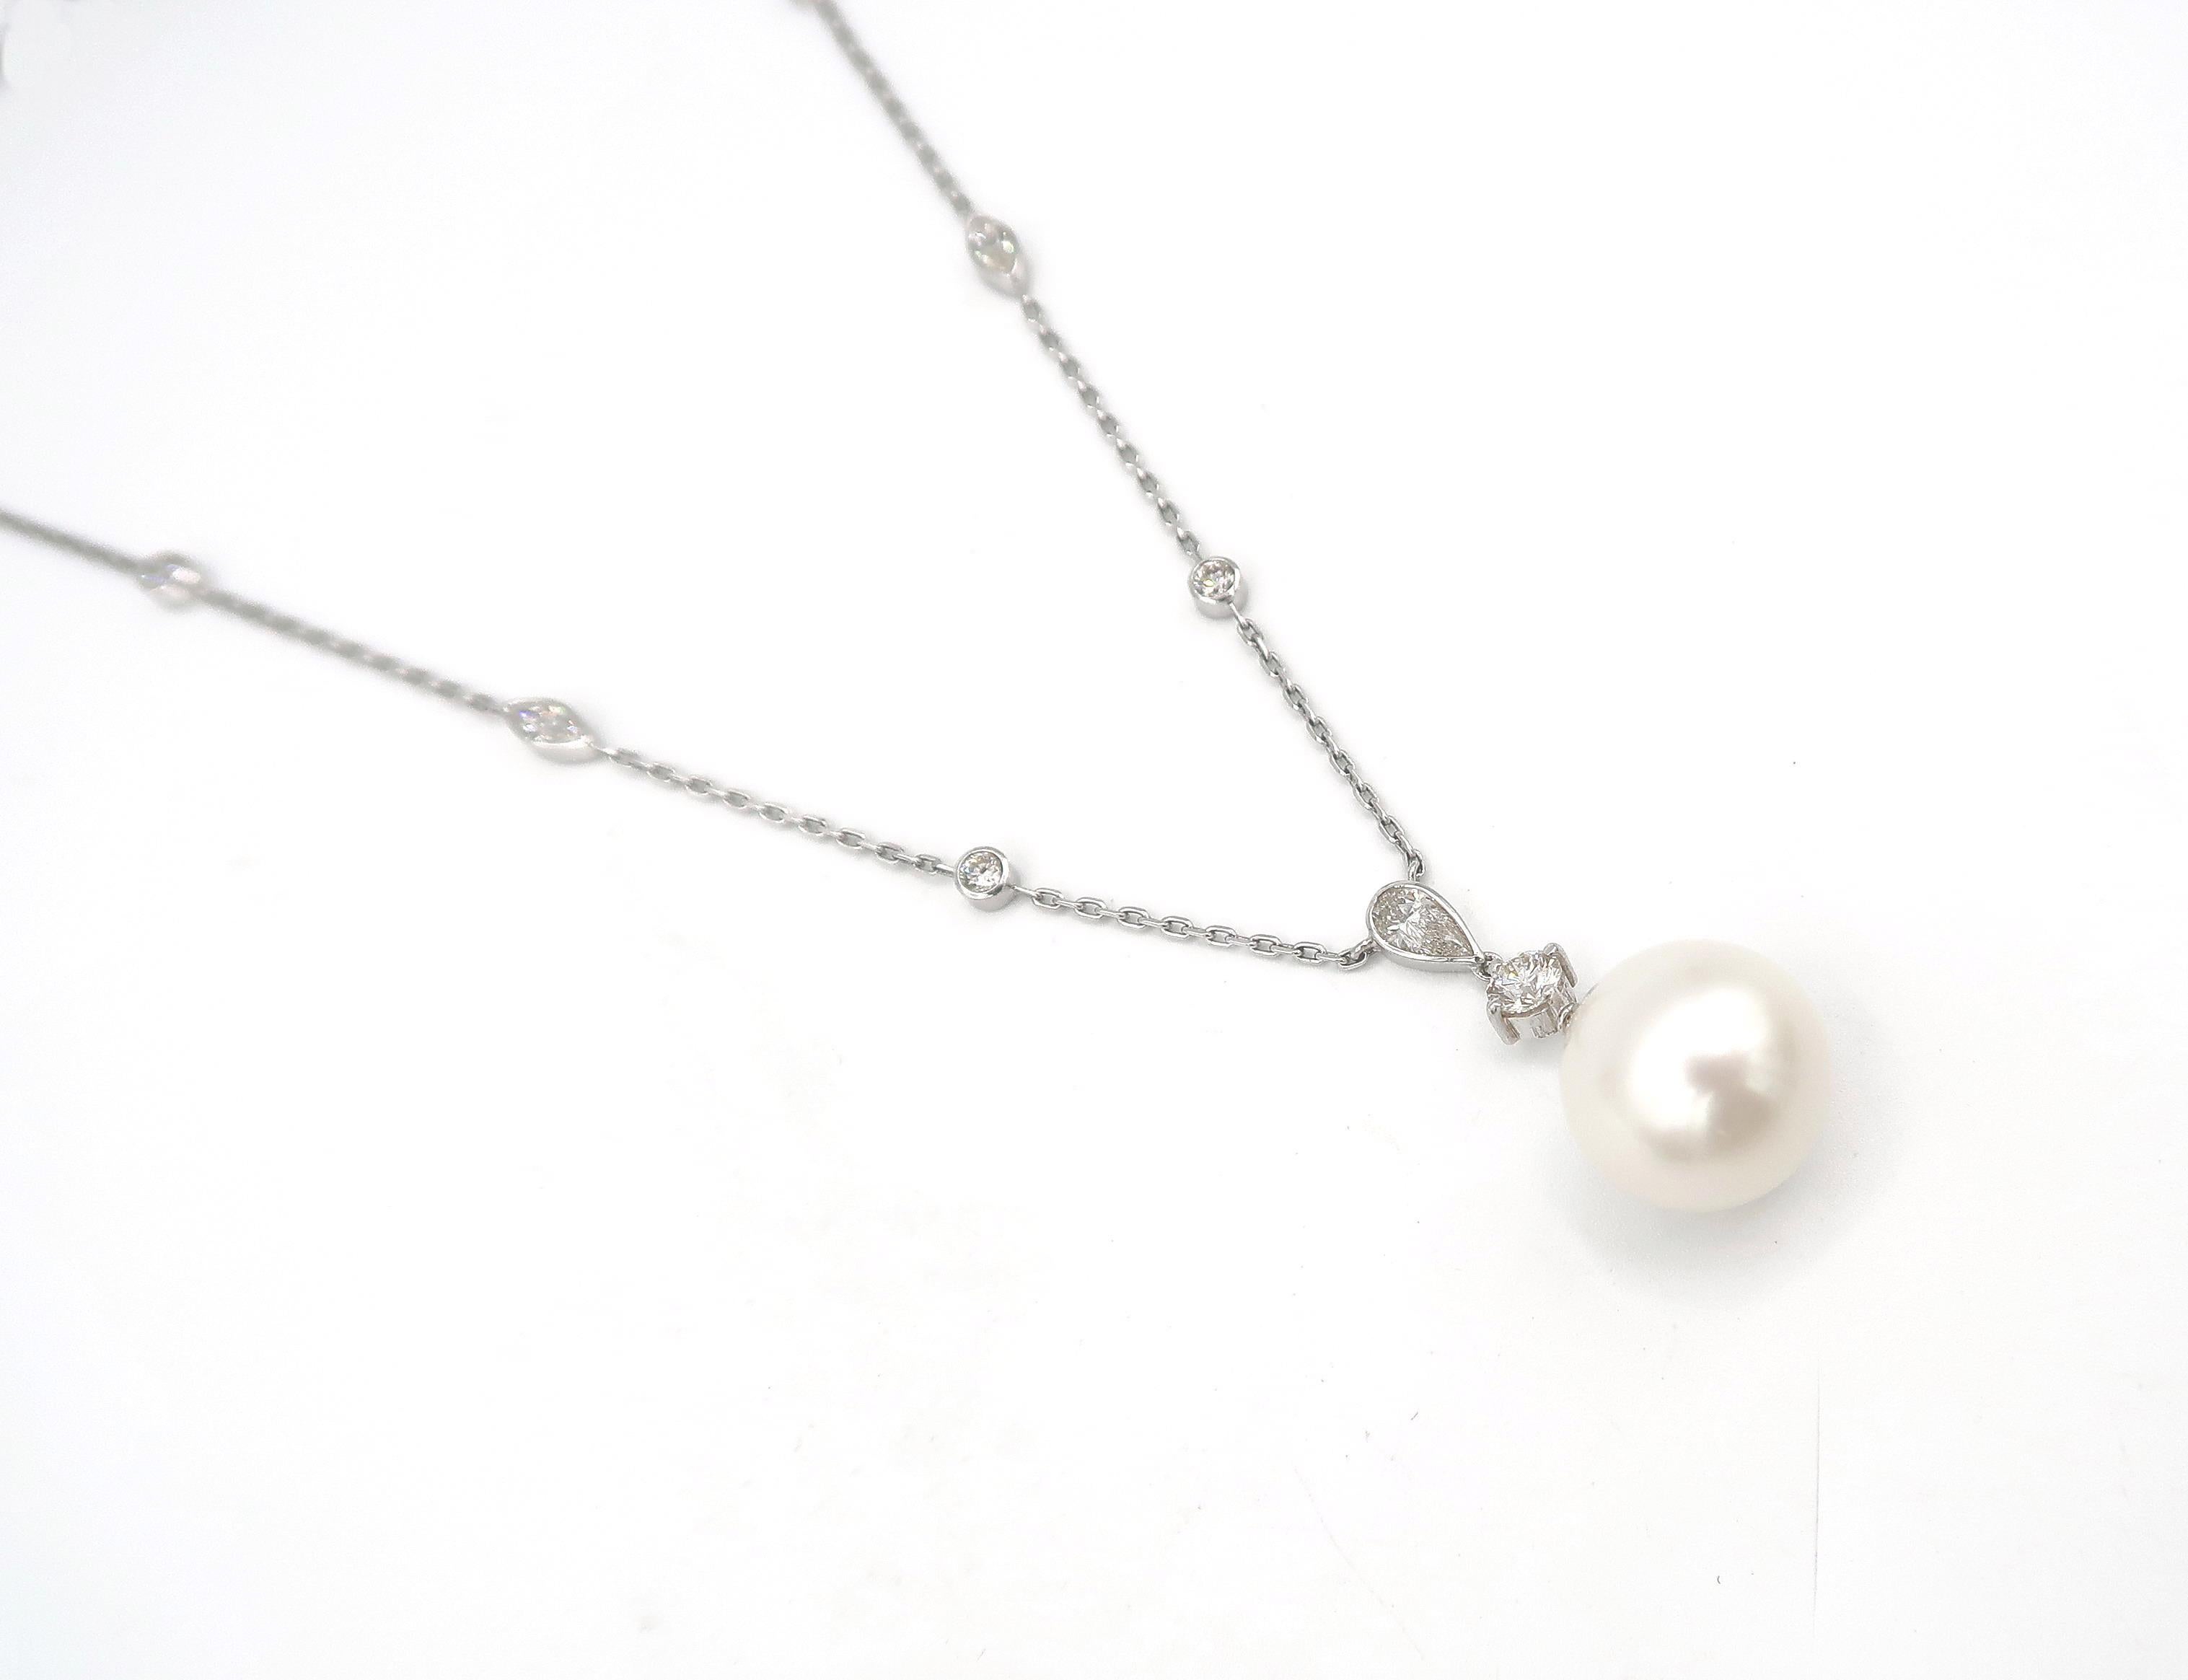 White South Sea Pearl Drop and Mixed Cut Diamond 18 Karat White Gold Chain Necklace

Gold: 18K 11.002g.
Pearl: White South Sea 1pc. Approx. 14 mm.
Diamond: 2.11cts.